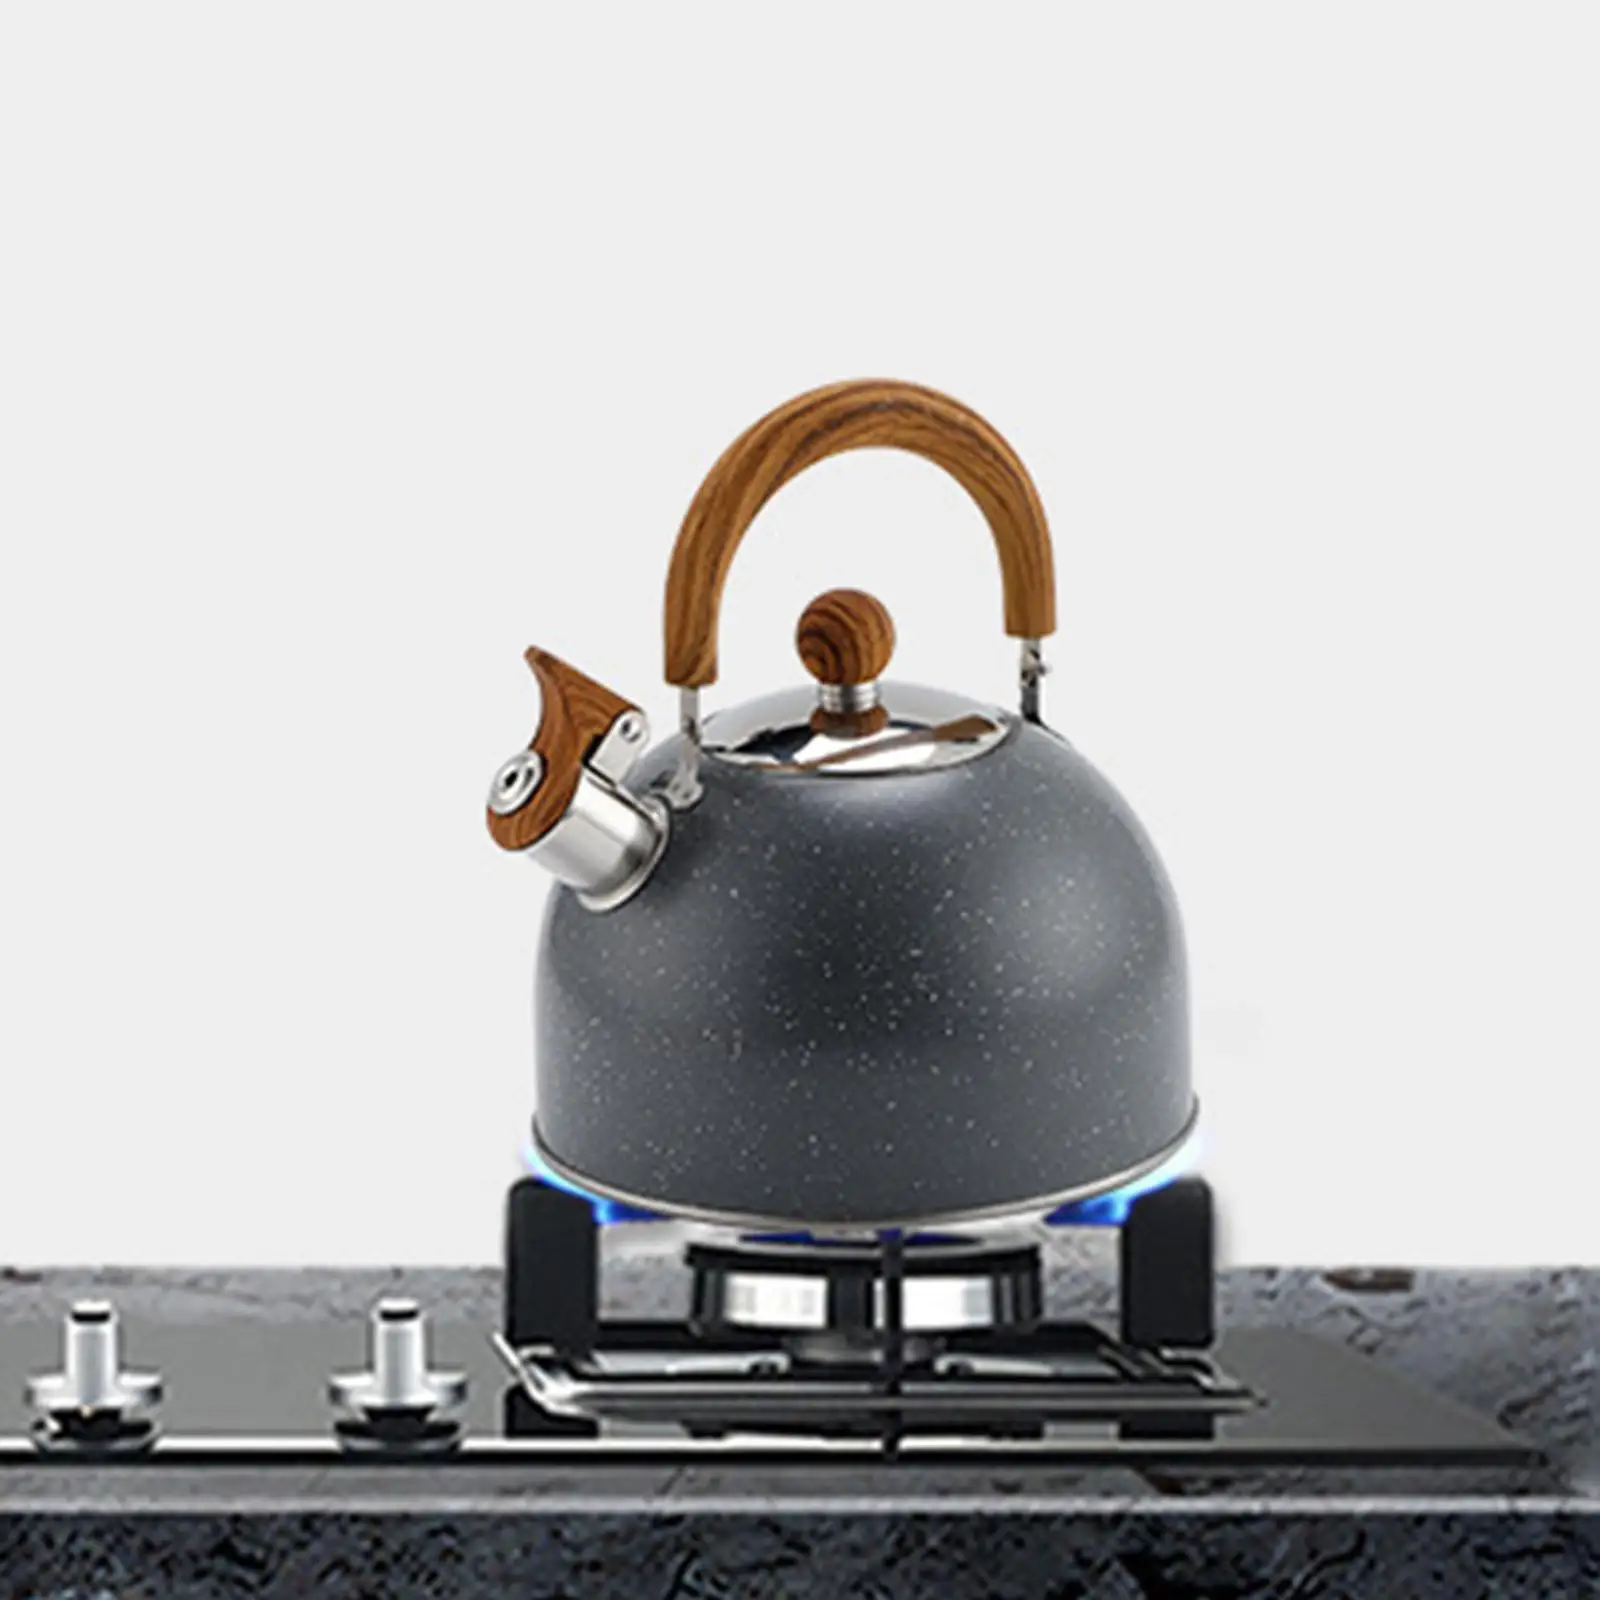 2.5L Whistling Tea Kettle, Fast Heating, Food Grade Stainless Steel Teapot